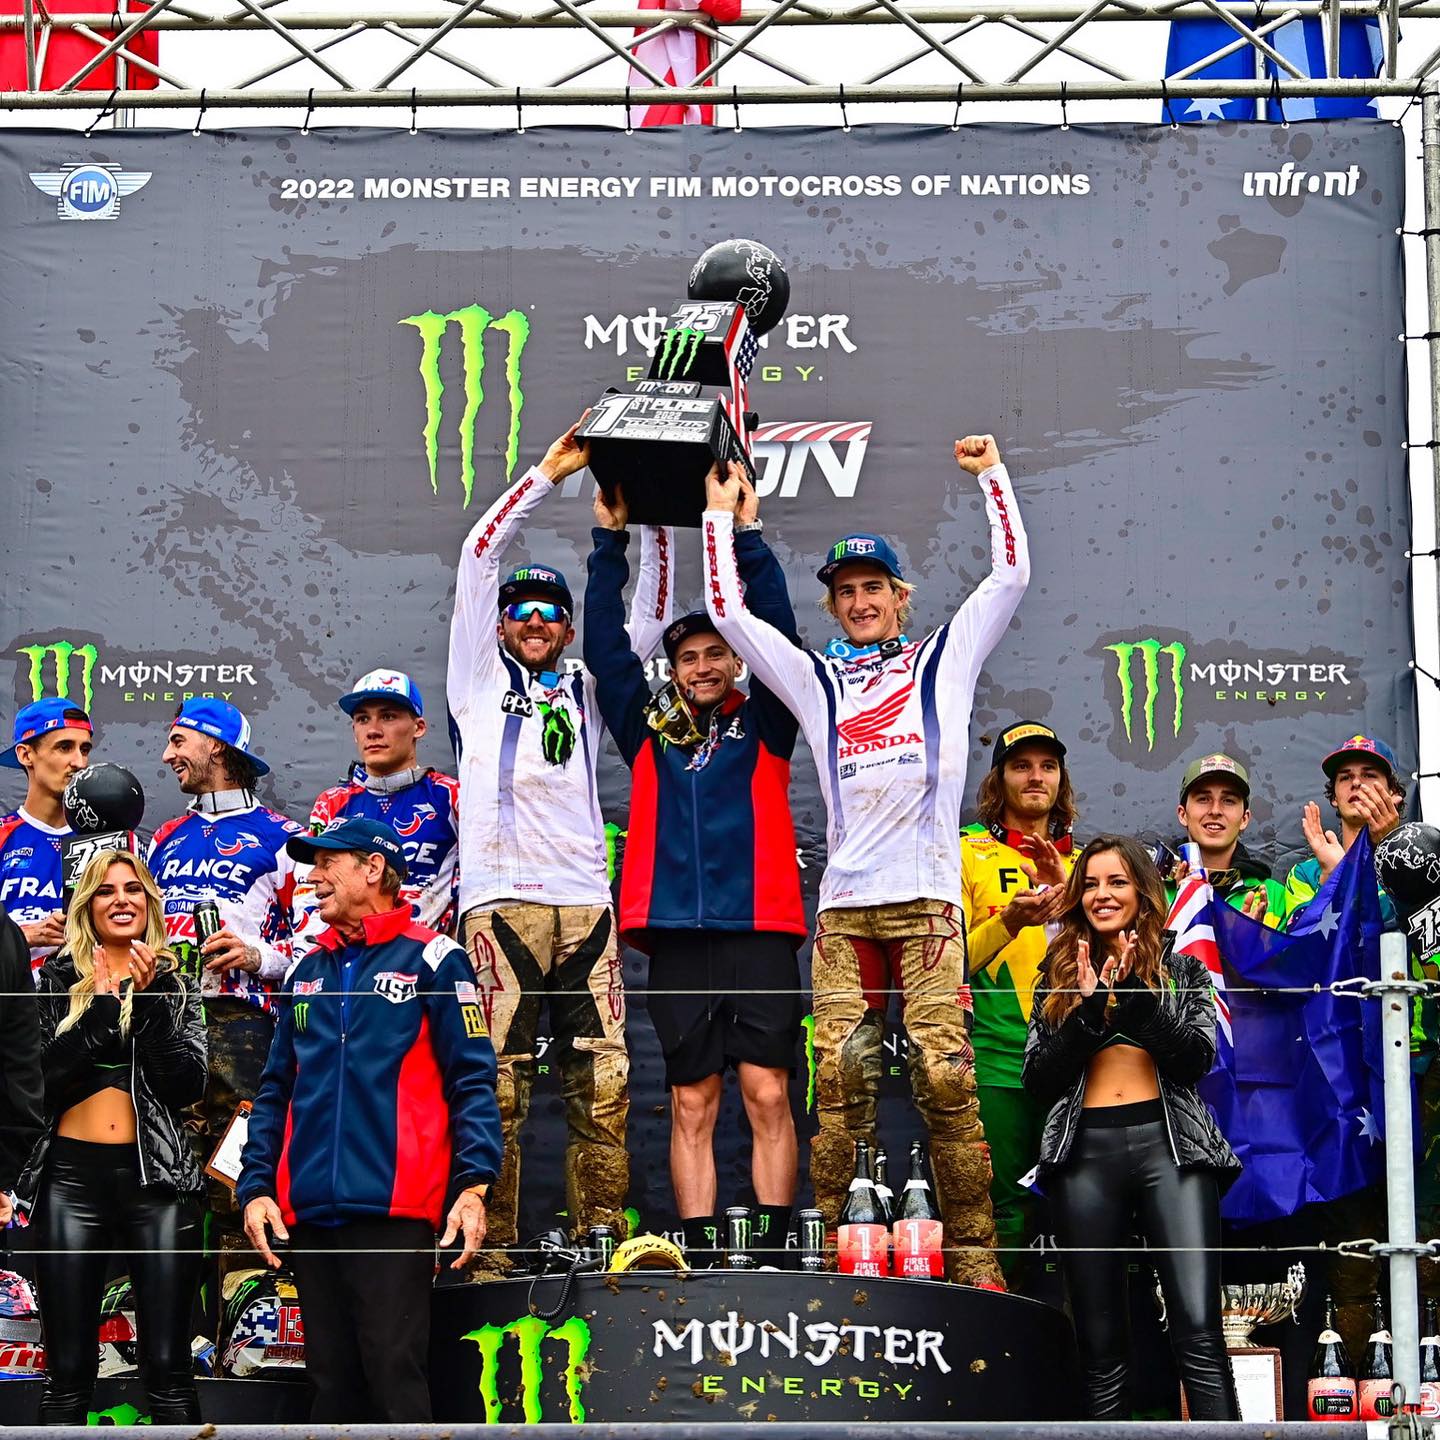 ALPINESTARS ATHLETES DOMINATE 75TH EDITION OF FIM MOTOCROSS OF NATIONS WITH A PODIUM SWEEP AS TEAM AMERICA WIN WITH FRANCE SECOND AND AUSTRALIA THIRD; JETT LAWRENCE, MAXIME RENAUX AND JUSTIN COOPER THE OVERALL CLASS WINNERS AT RED BUD MX, MICHIGAN USA